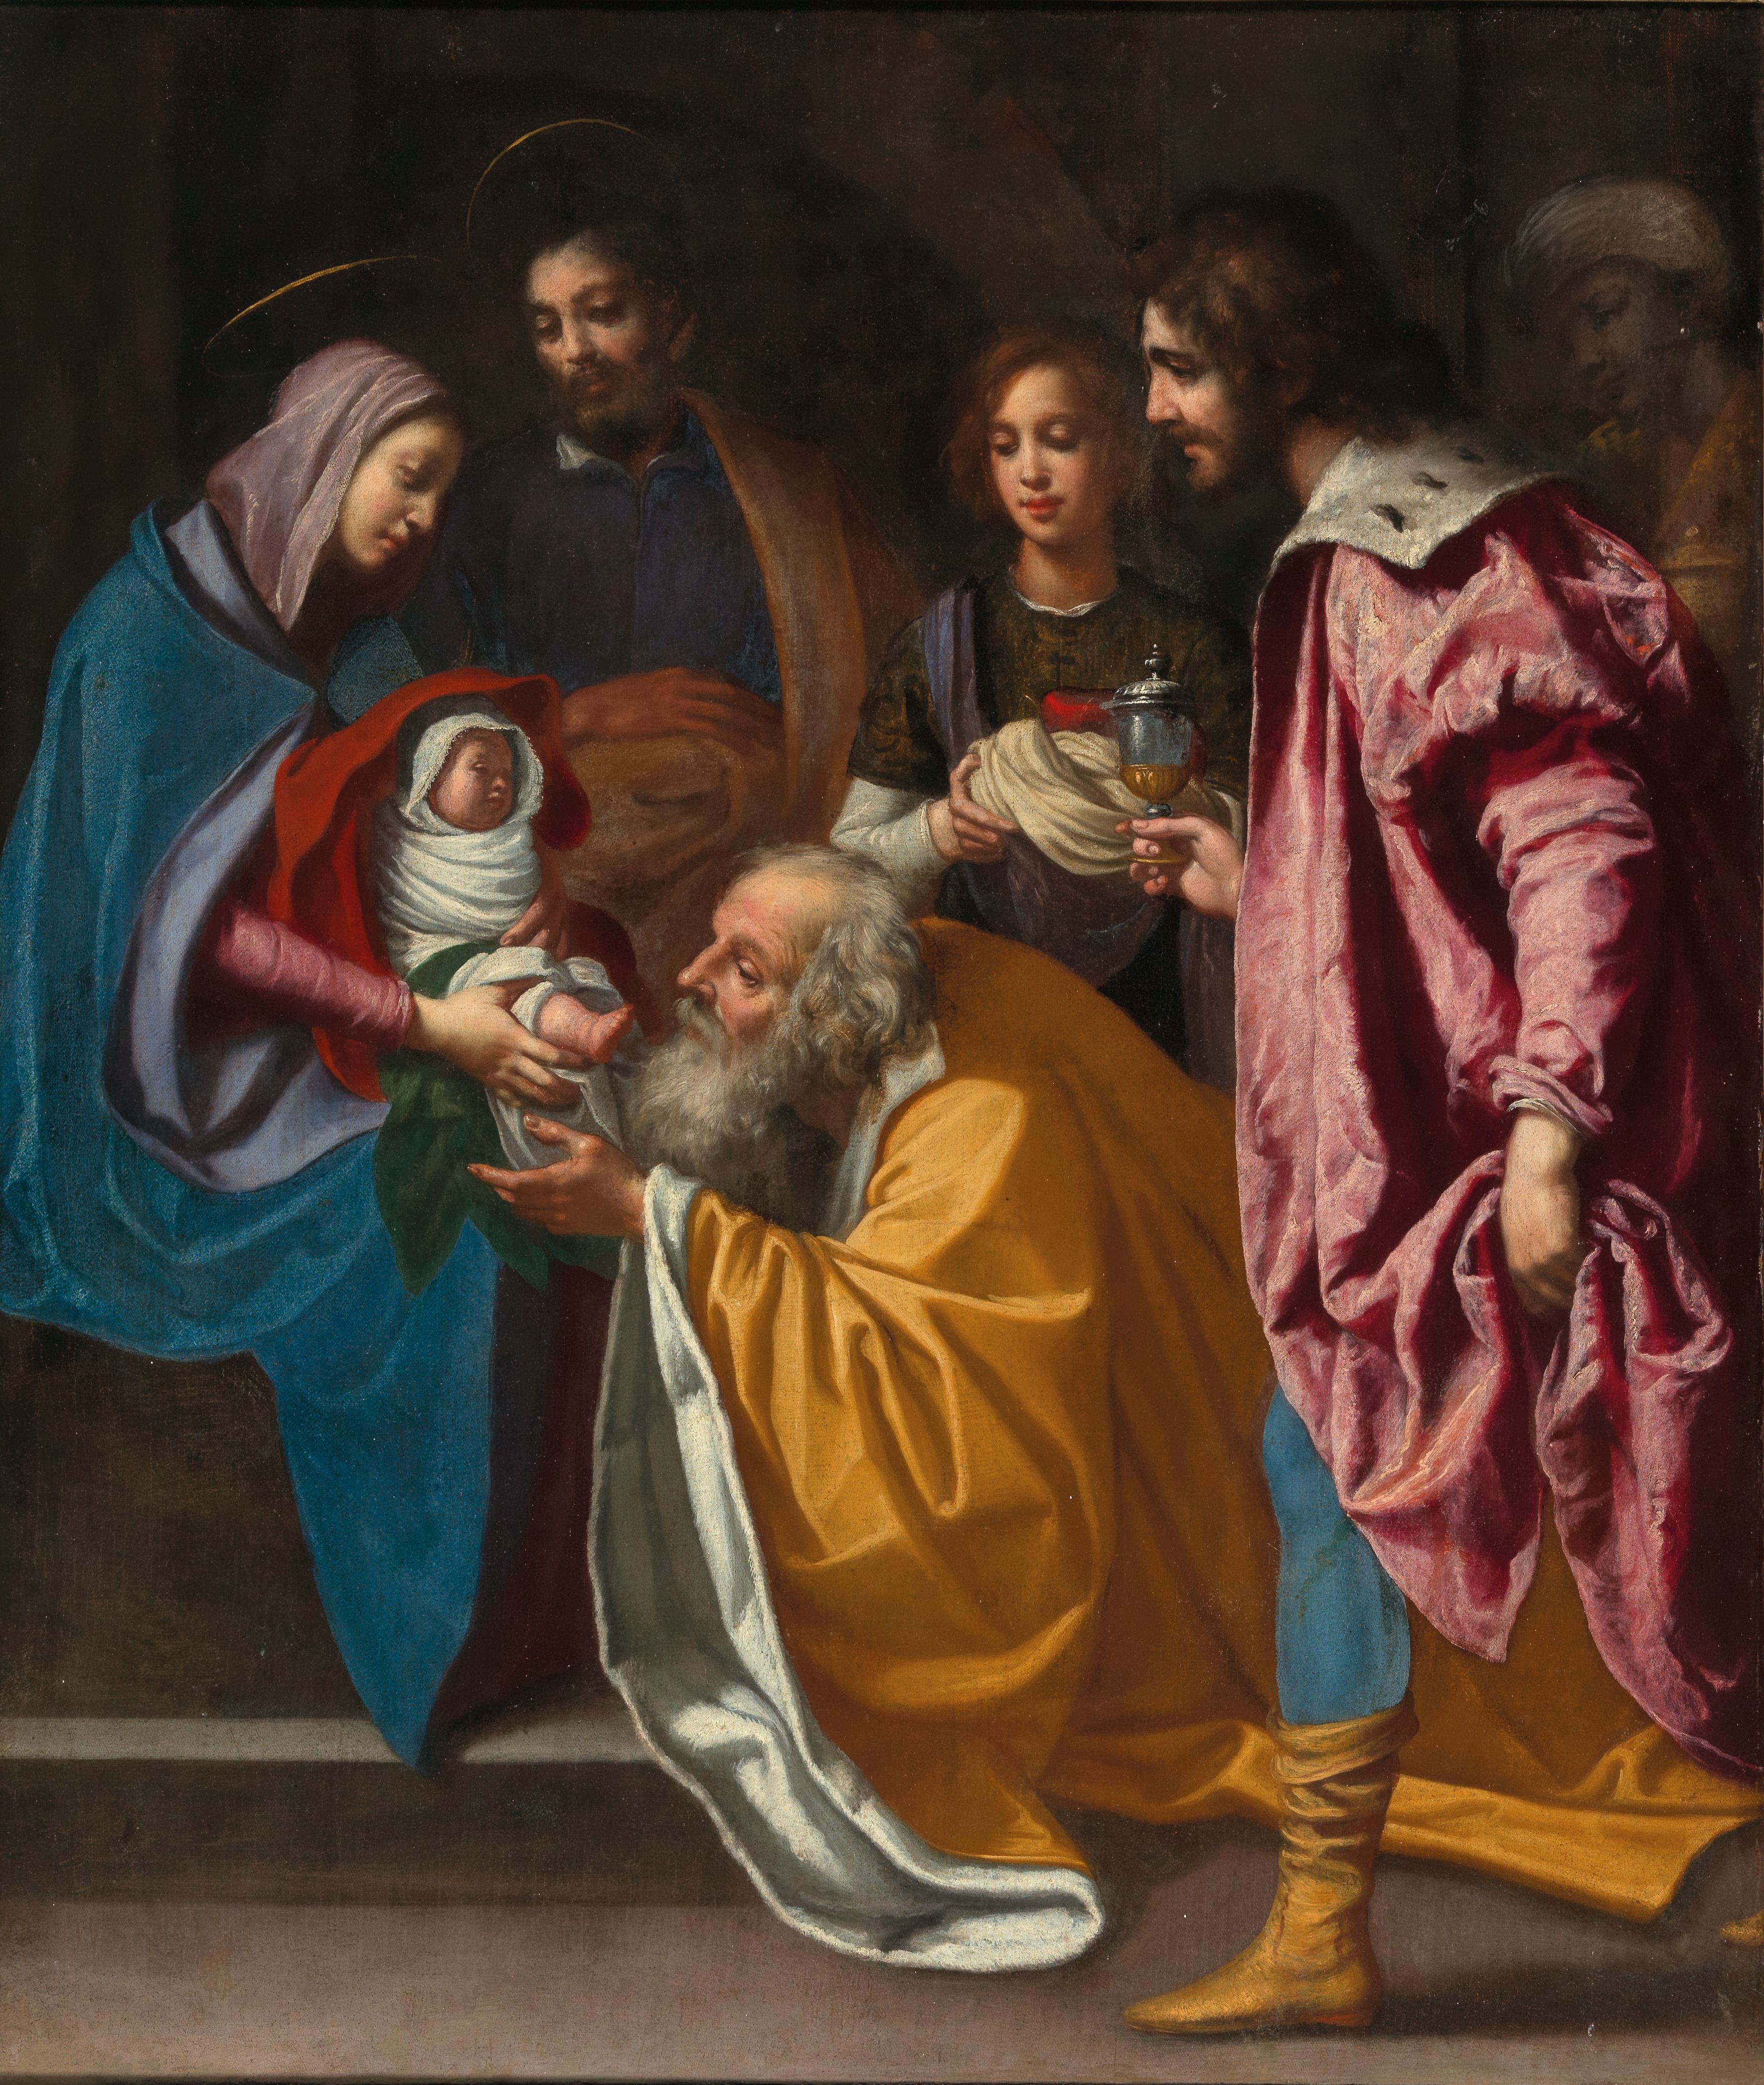 The Adoration of the Magi, by Felice Ficherelli